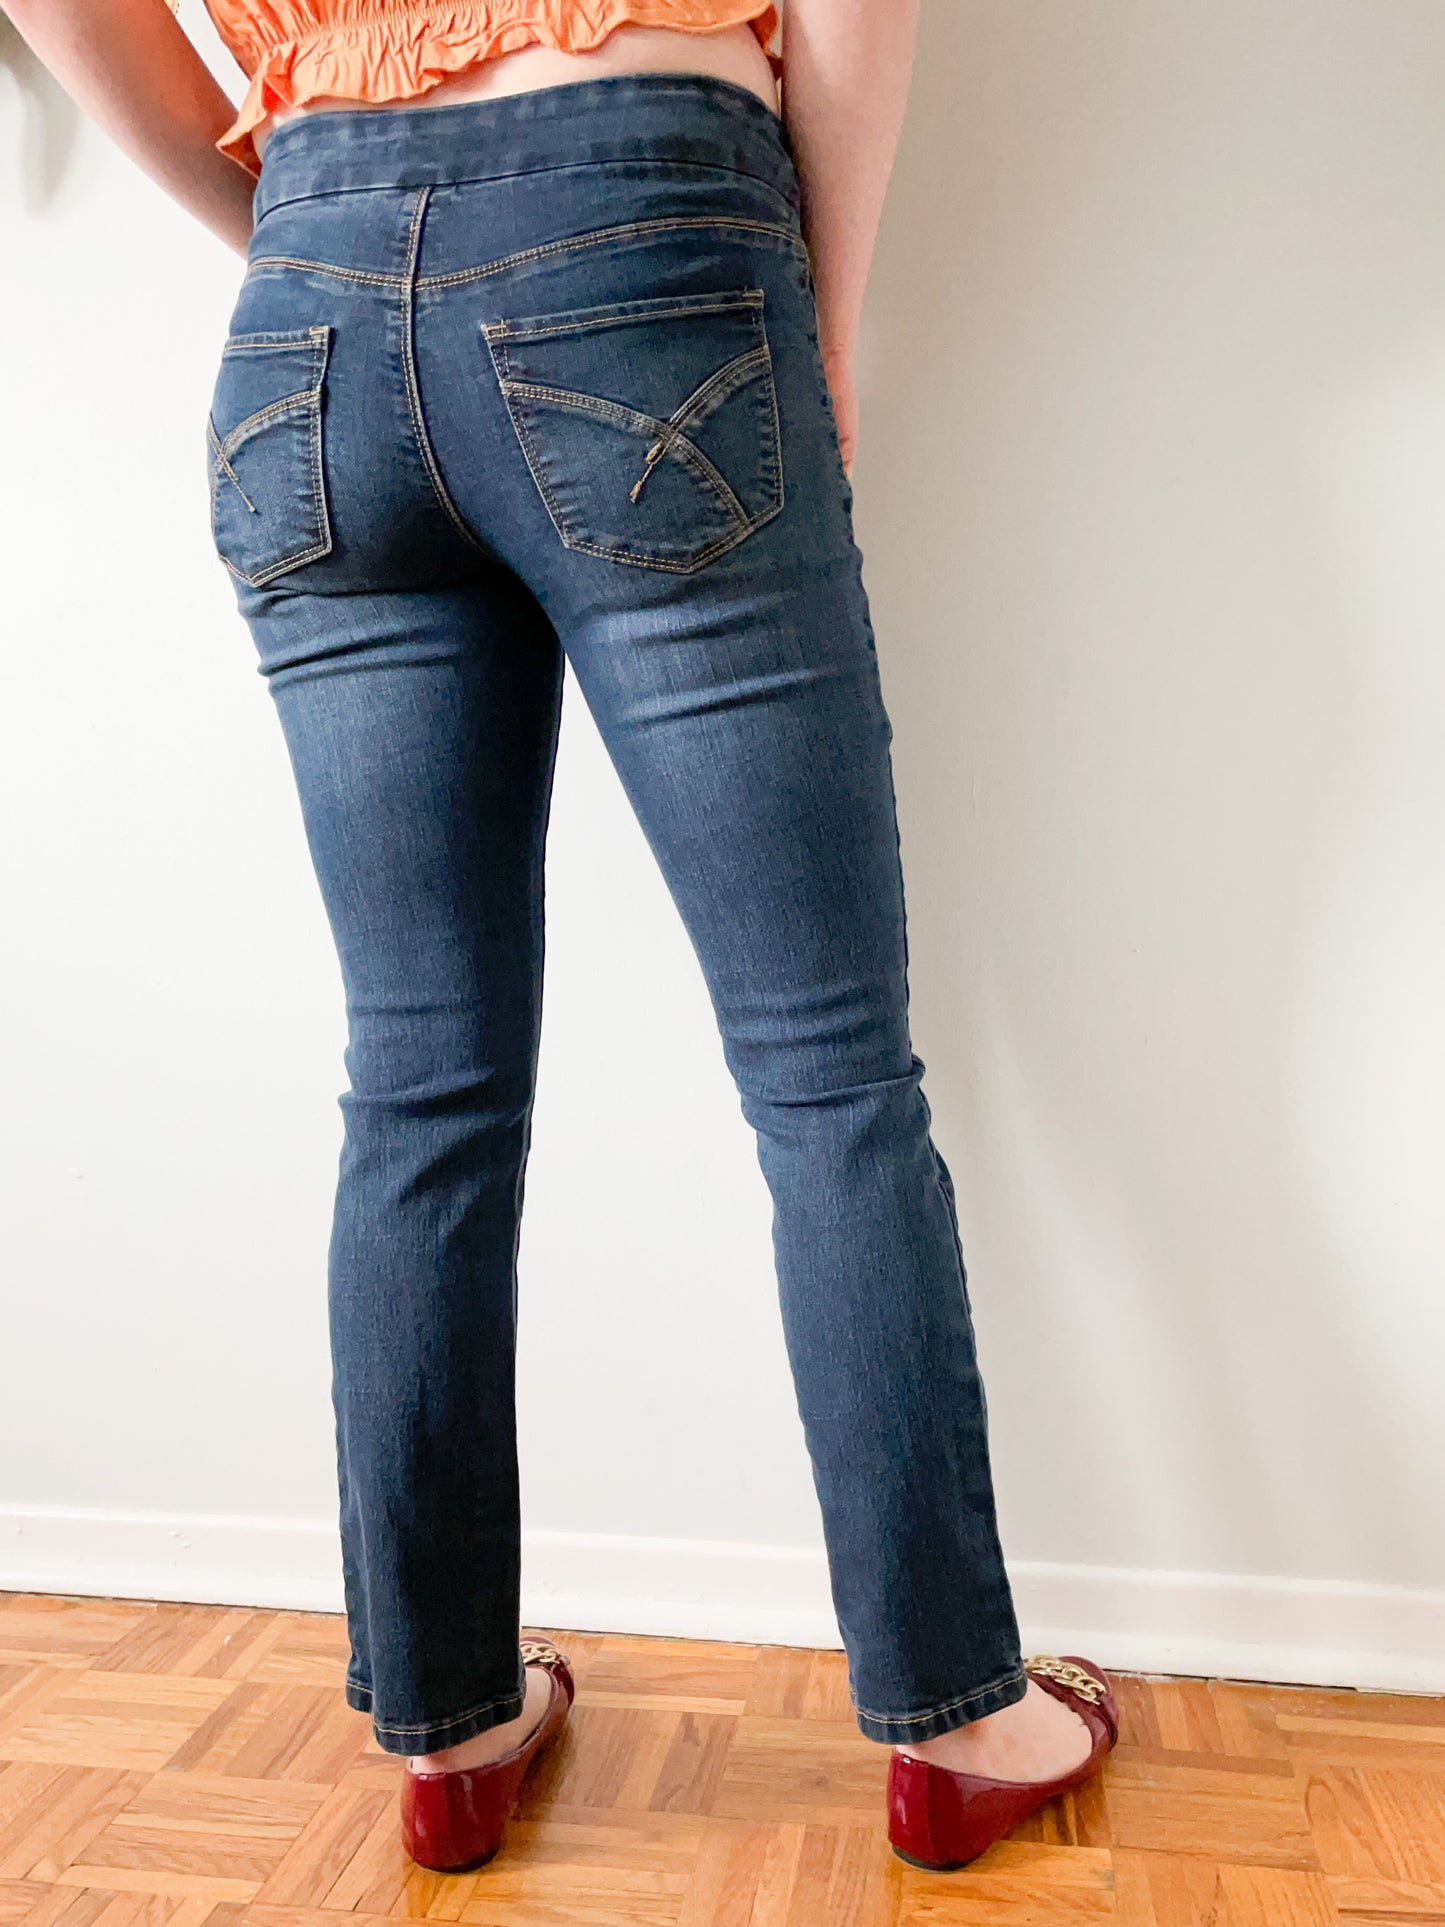 Pull On Straight Leg Mid Rise Jeans - XS/S